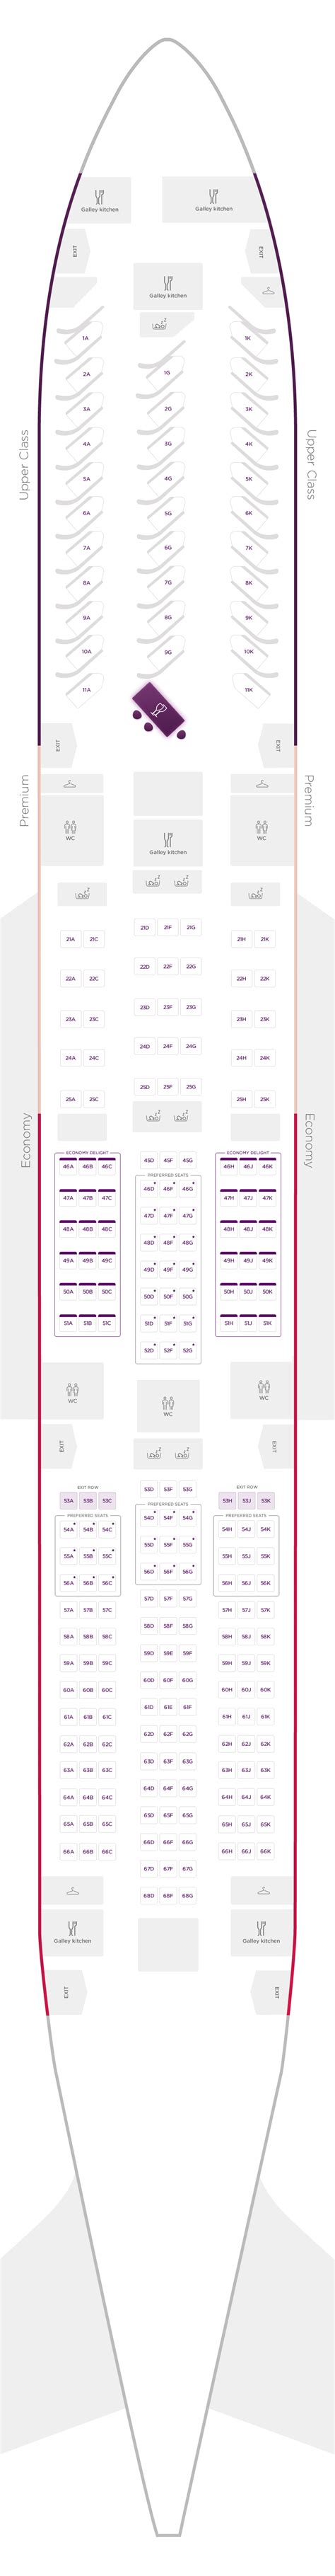 787 Dreamliner Seating Plan Two Birds Home